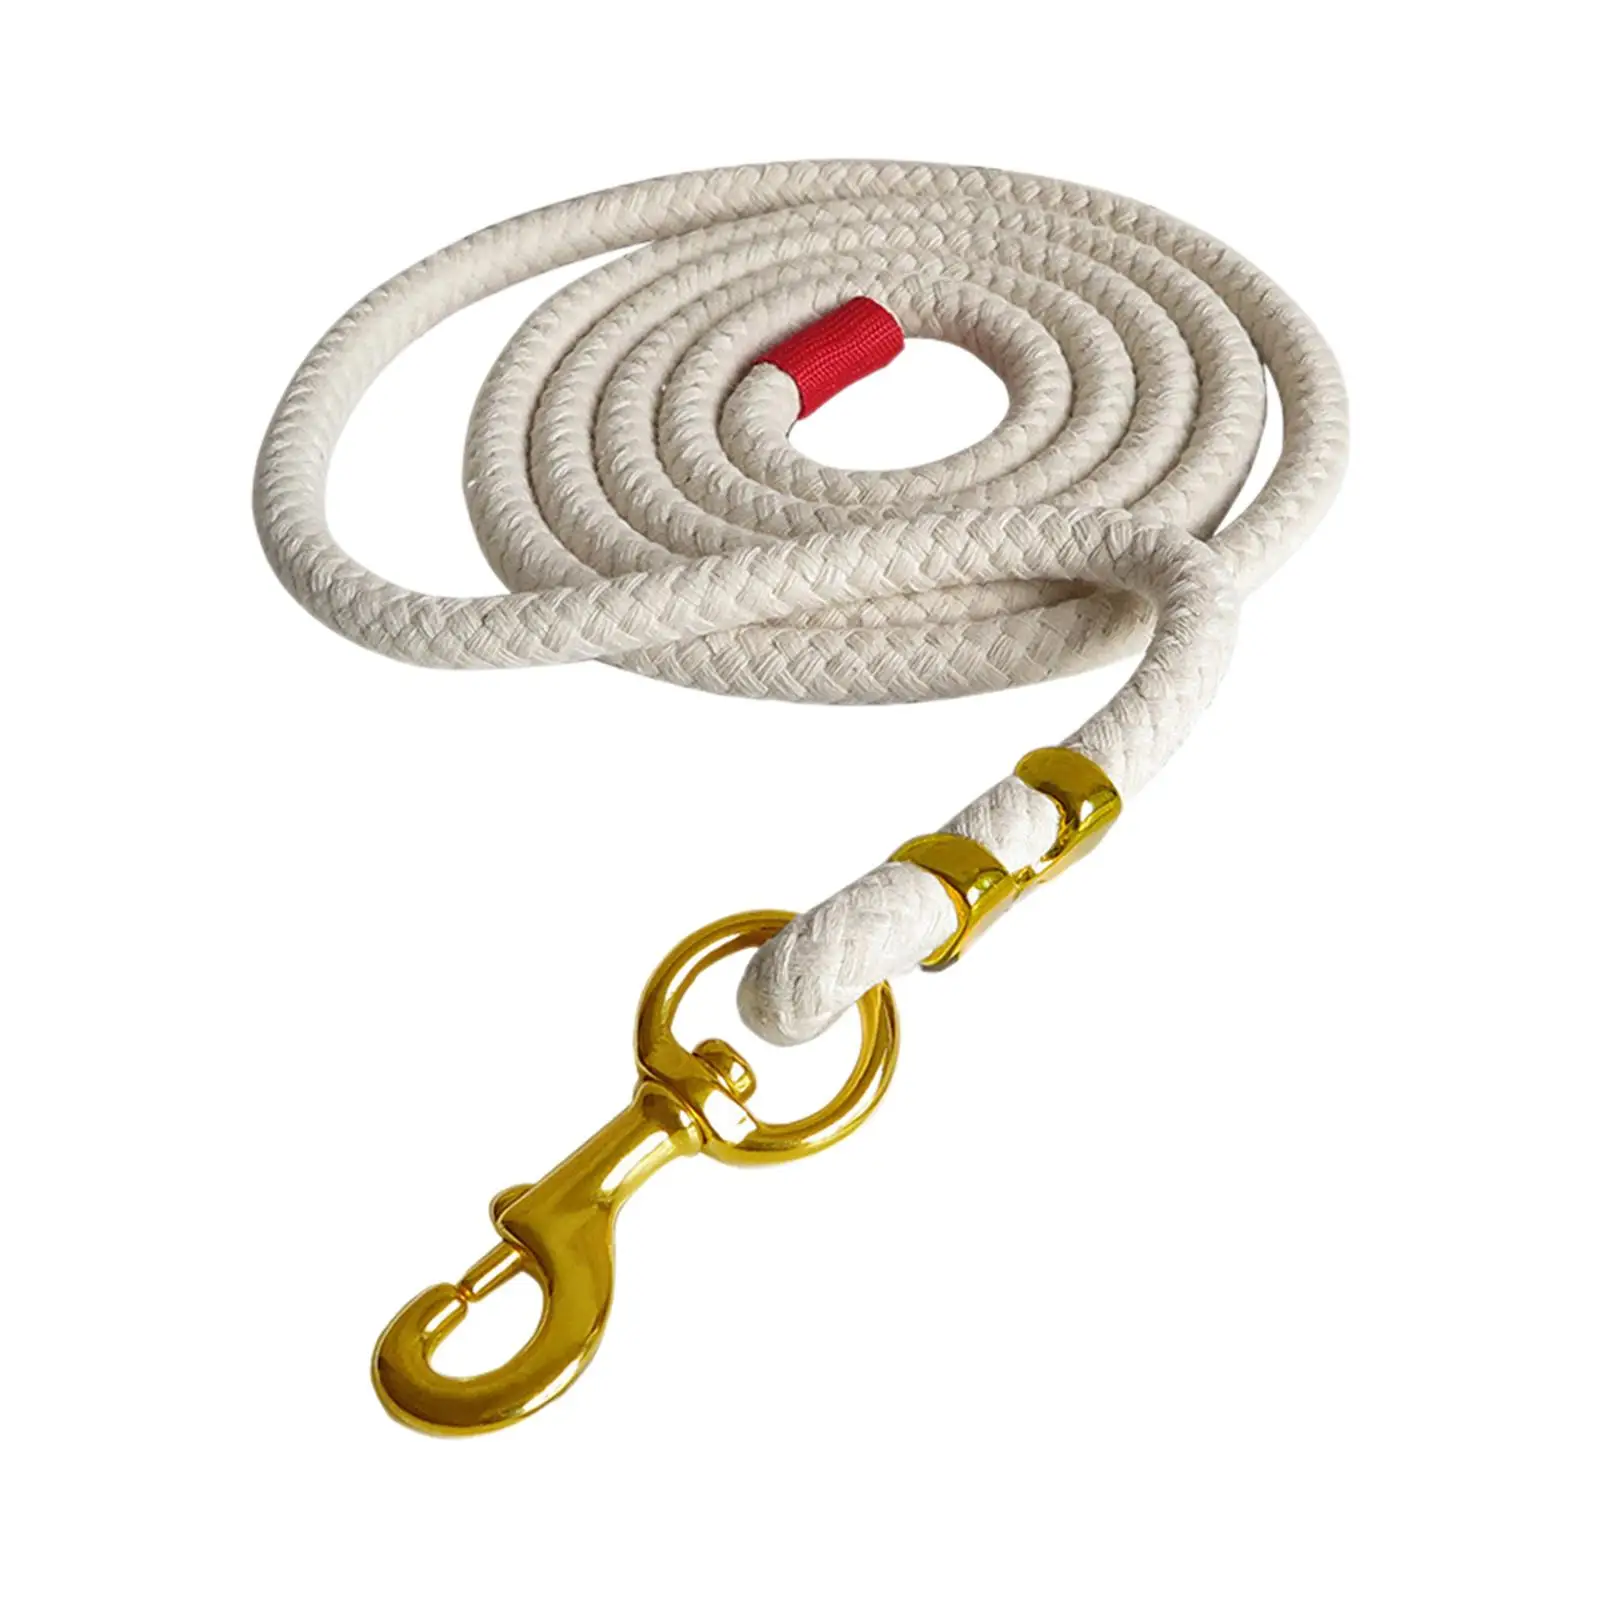 Horse Lead Rope Attaches to Halter or Harness Cord Rein Equestrian Lead Rope